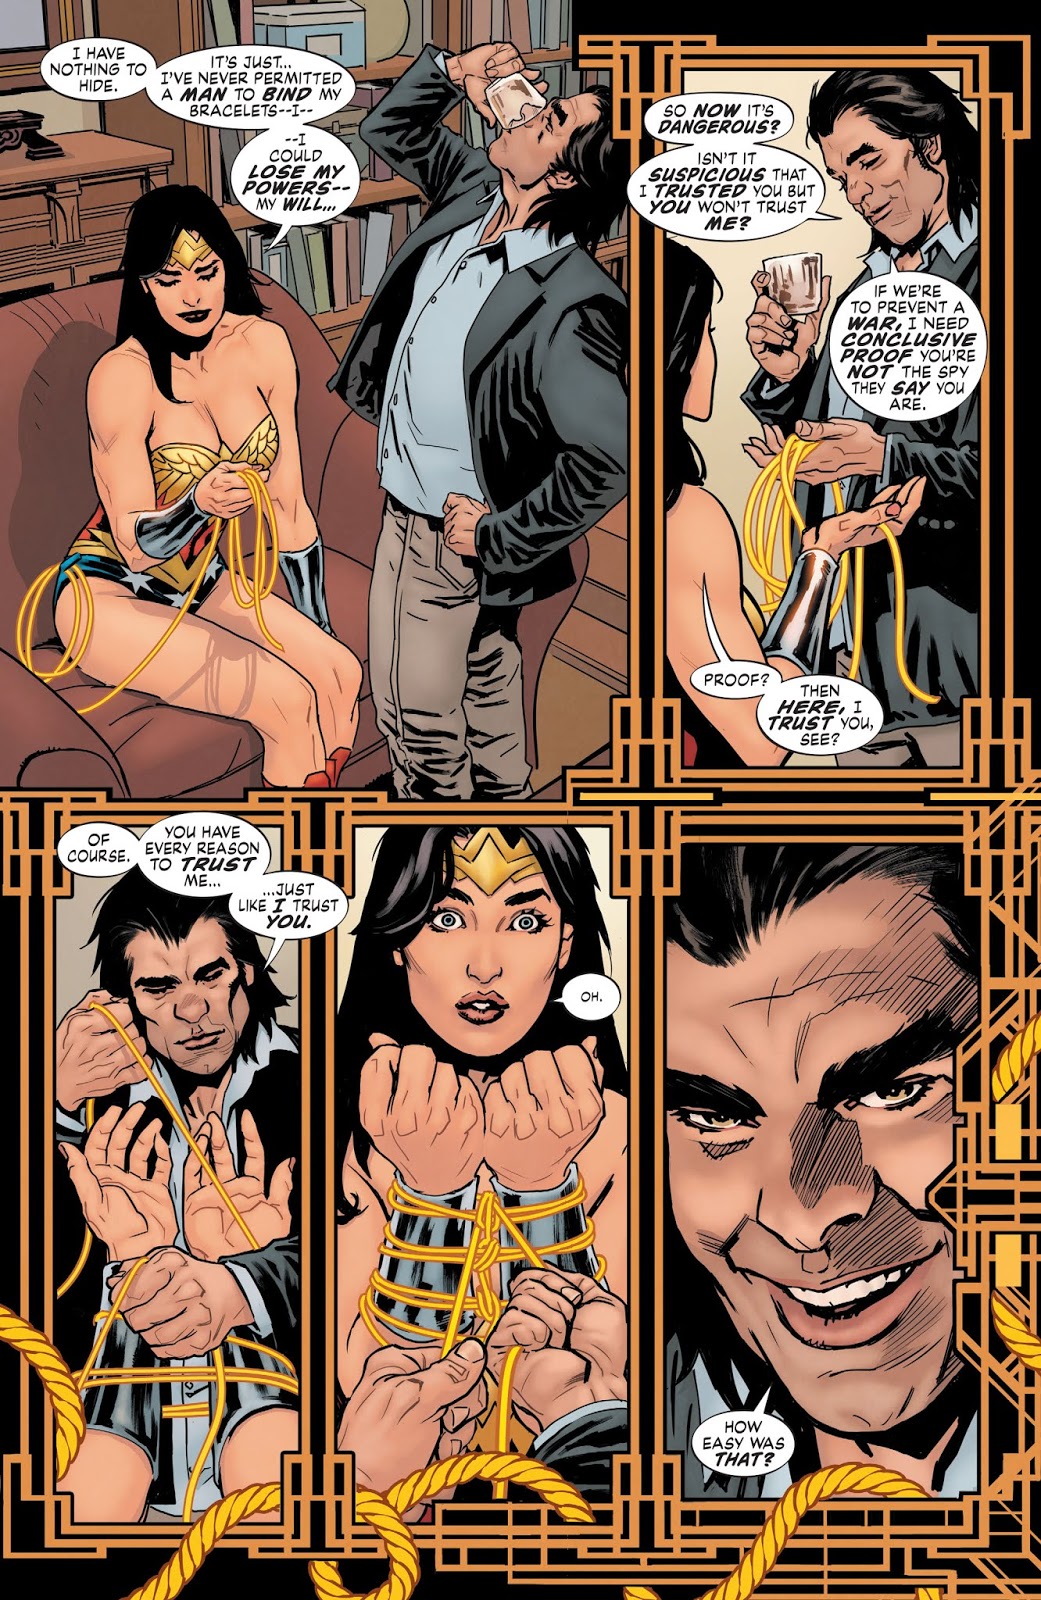 From – Wonder Woman – Earth 1 Vol. 2